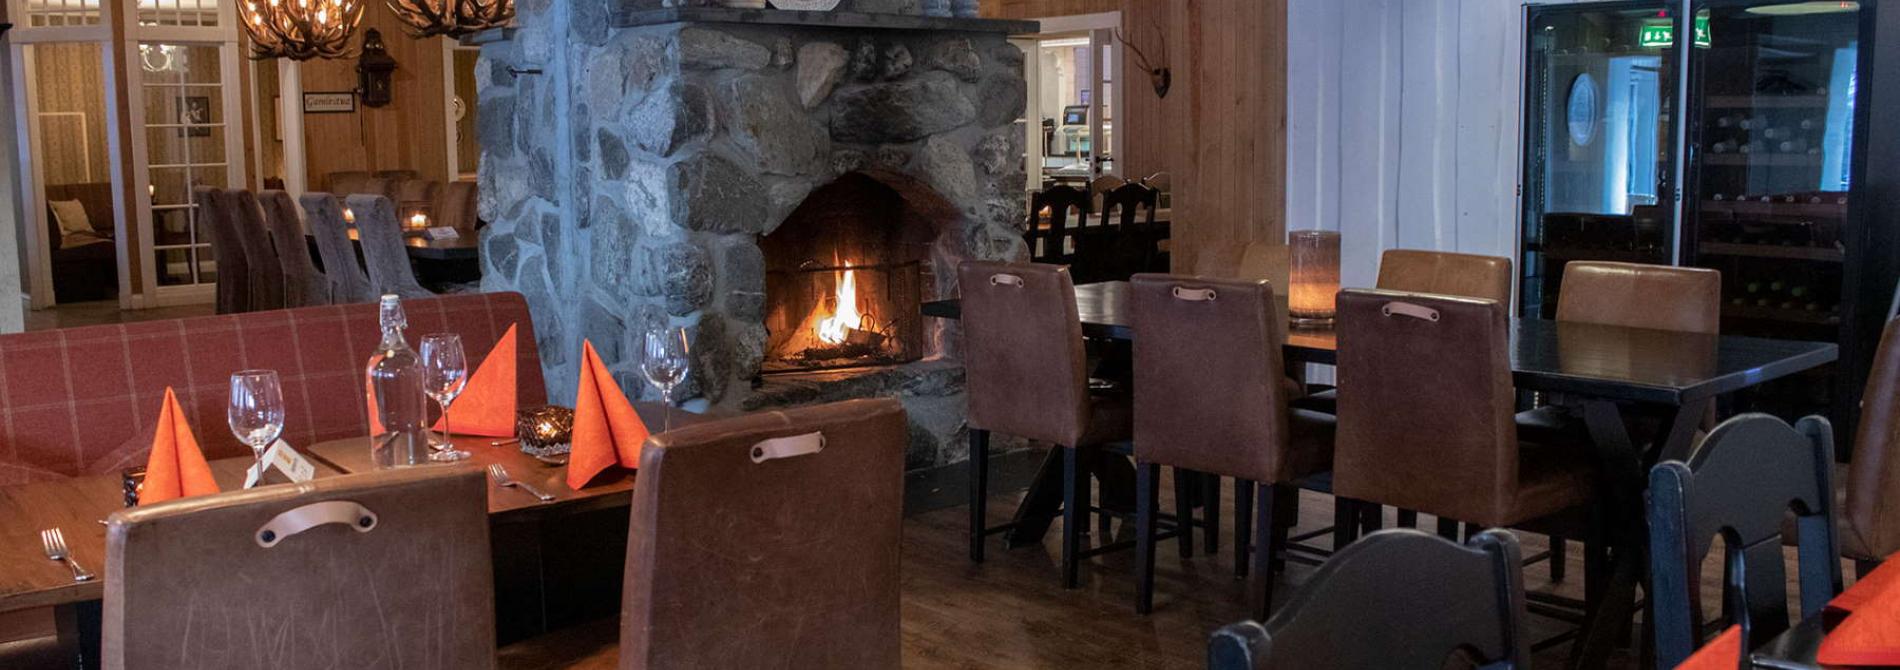 Restaurant with fire place